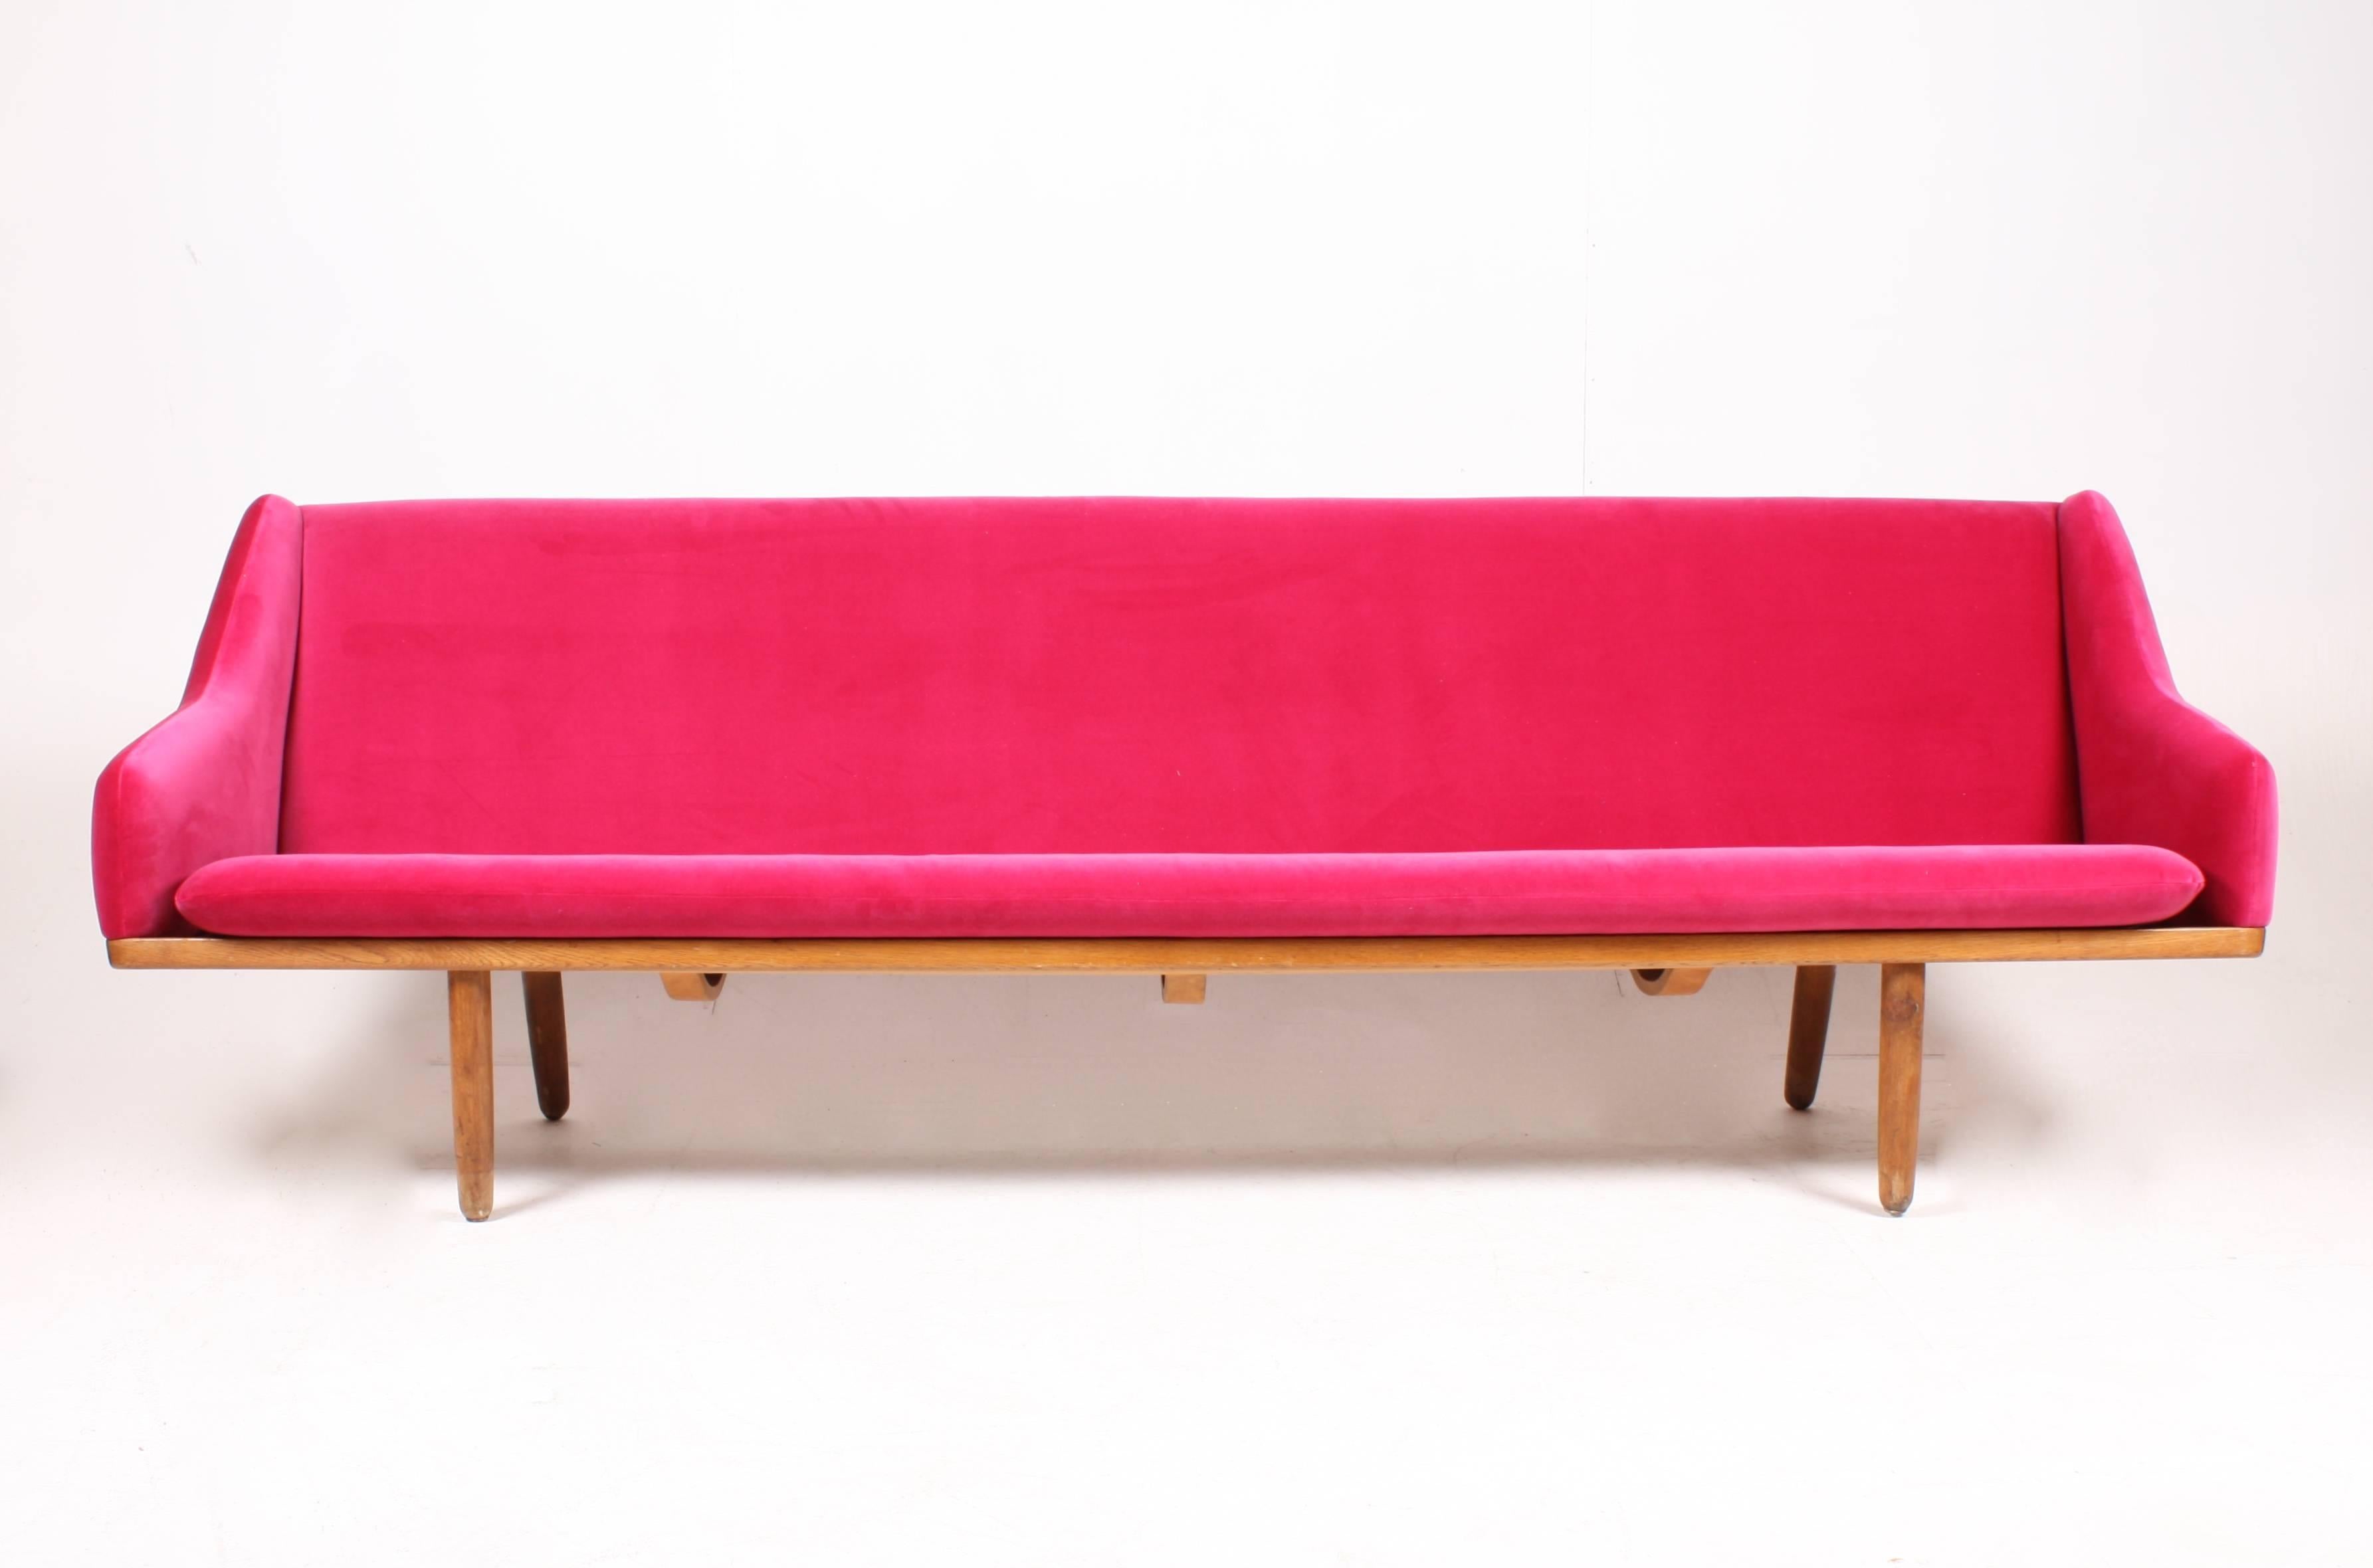 Freestanding four-seat sofa, model FR133 with oak frame. The frame is cleaned/waxed and the sofa is upholstered with new velvet fabric. Designed by Maa. Poul Volther for Frem Røjle cabinetmakers in the late 1950s. 
Great condition.